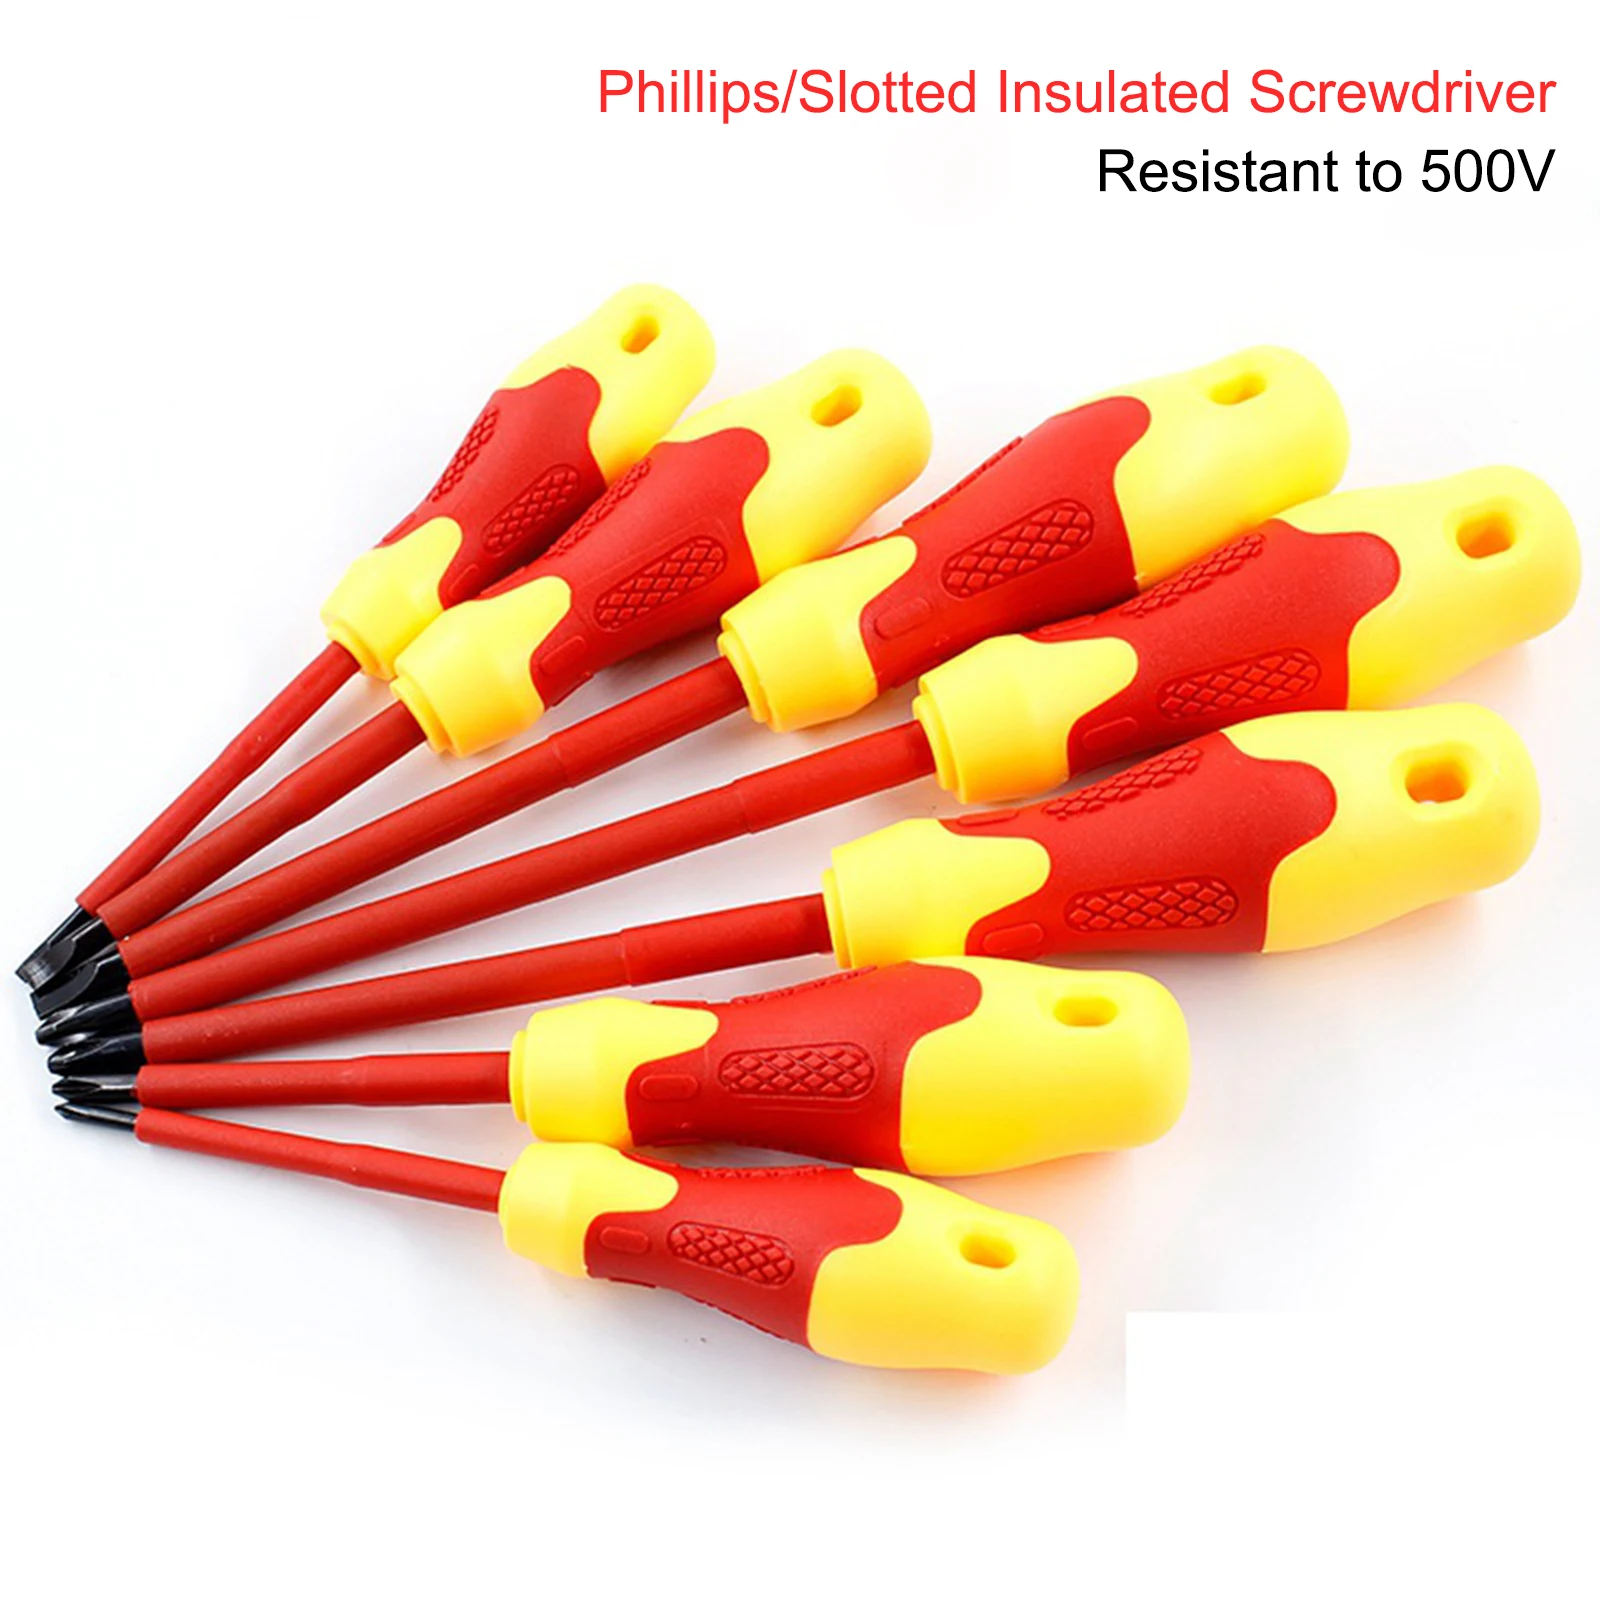 

7pcs Insulated Screwdriver Magnetic Phillips Slotted Screw Driver Bit Screwdrivers Combination Set Electrician Hand Tools